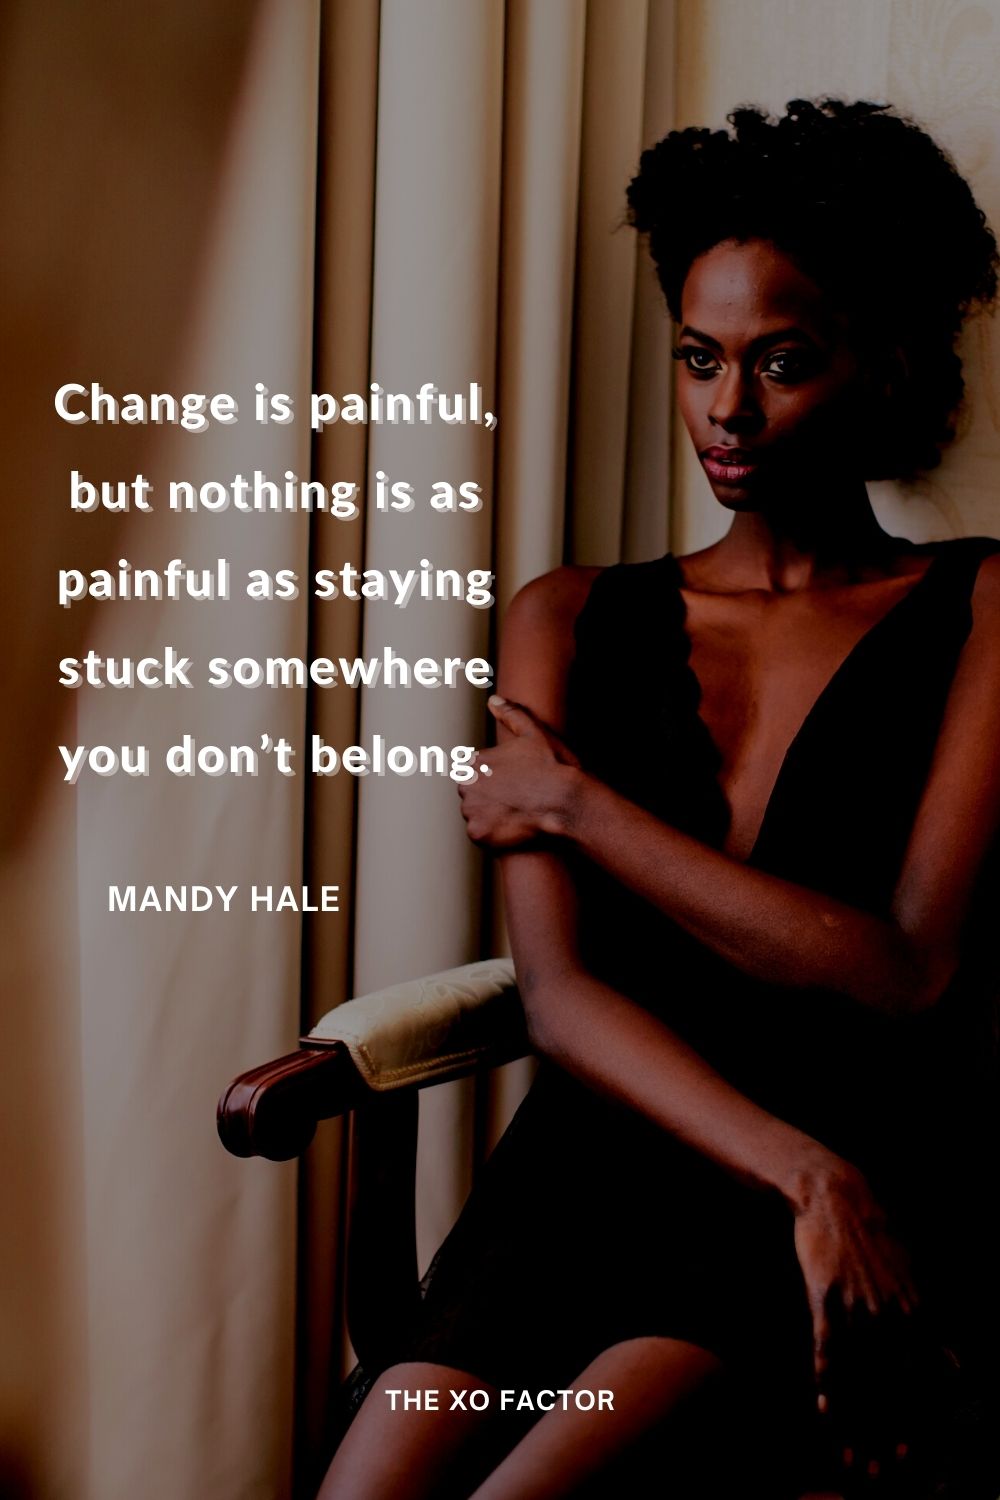 Change is painful, but nothing is as painful as staying stuck somewhere you don’t belong.